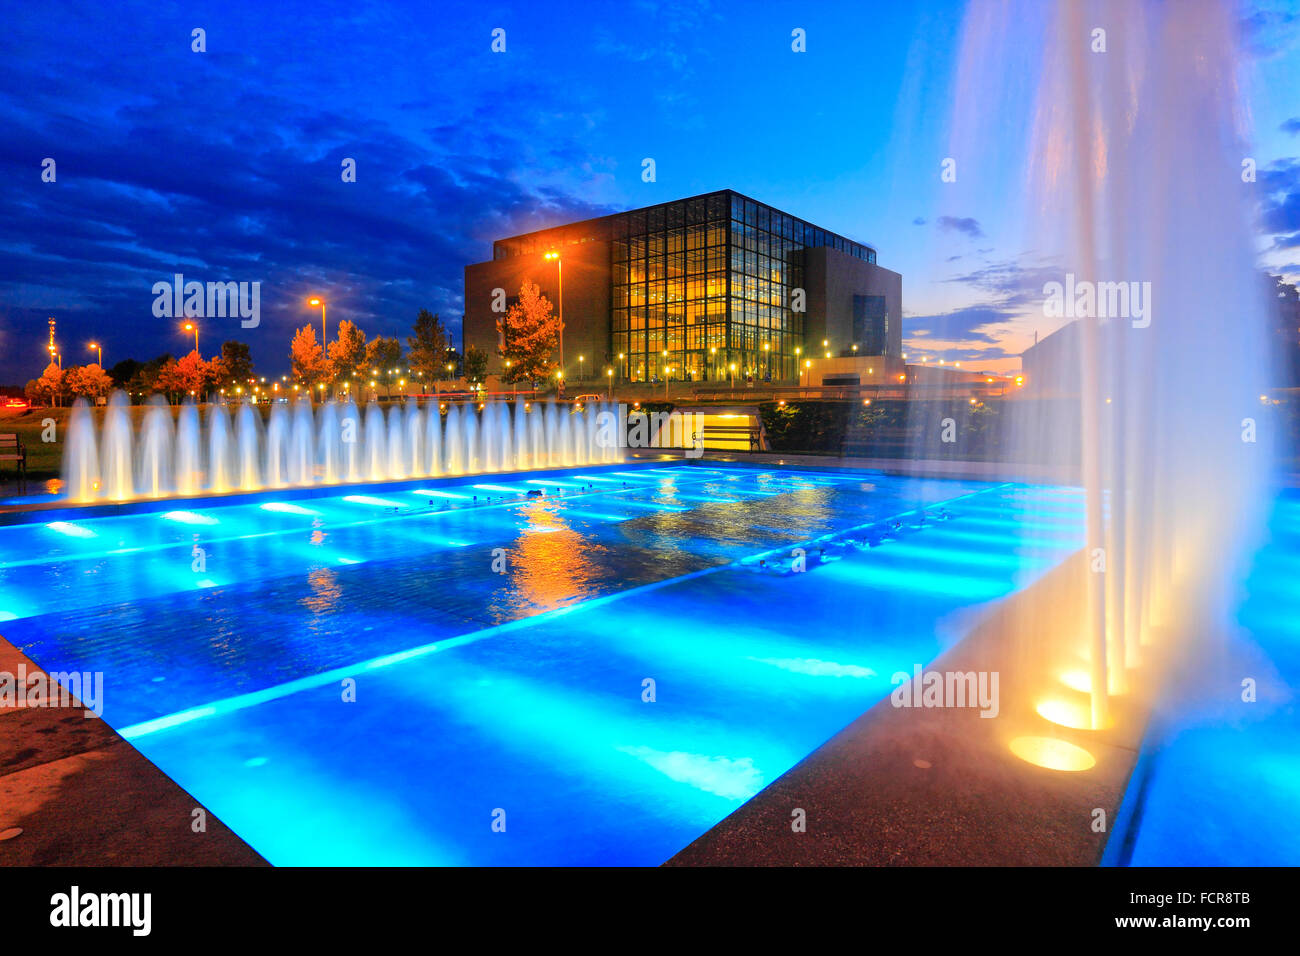 New national library in Zagreb by night with illuminated fountain in front. Stock Photo